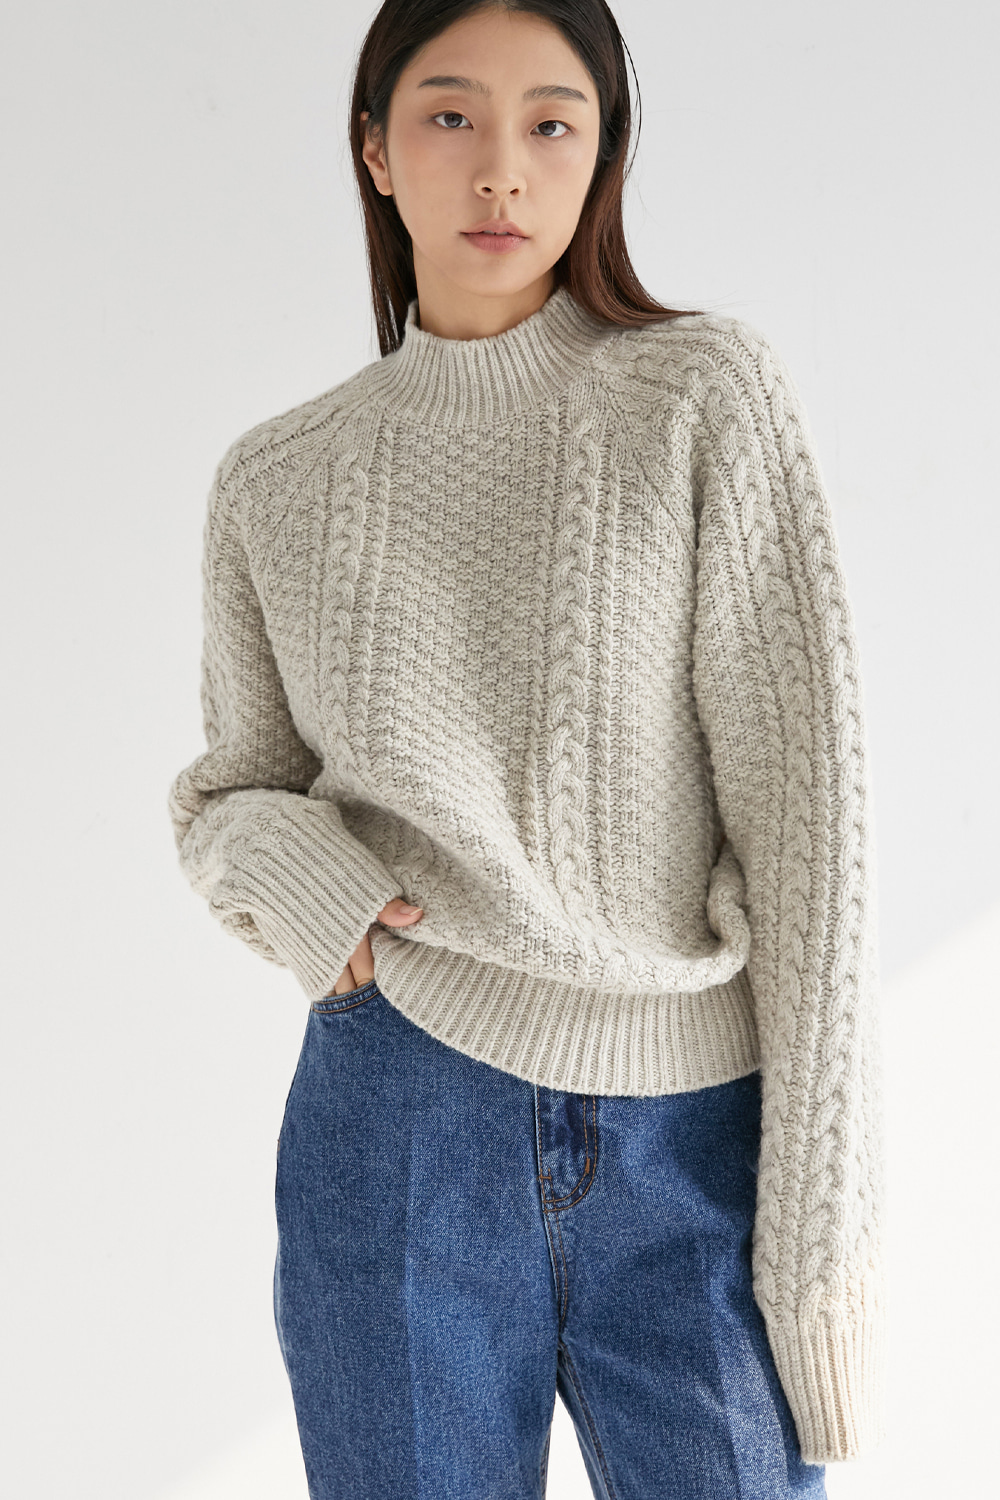 Fisherman cable knit_ oatmeal beige